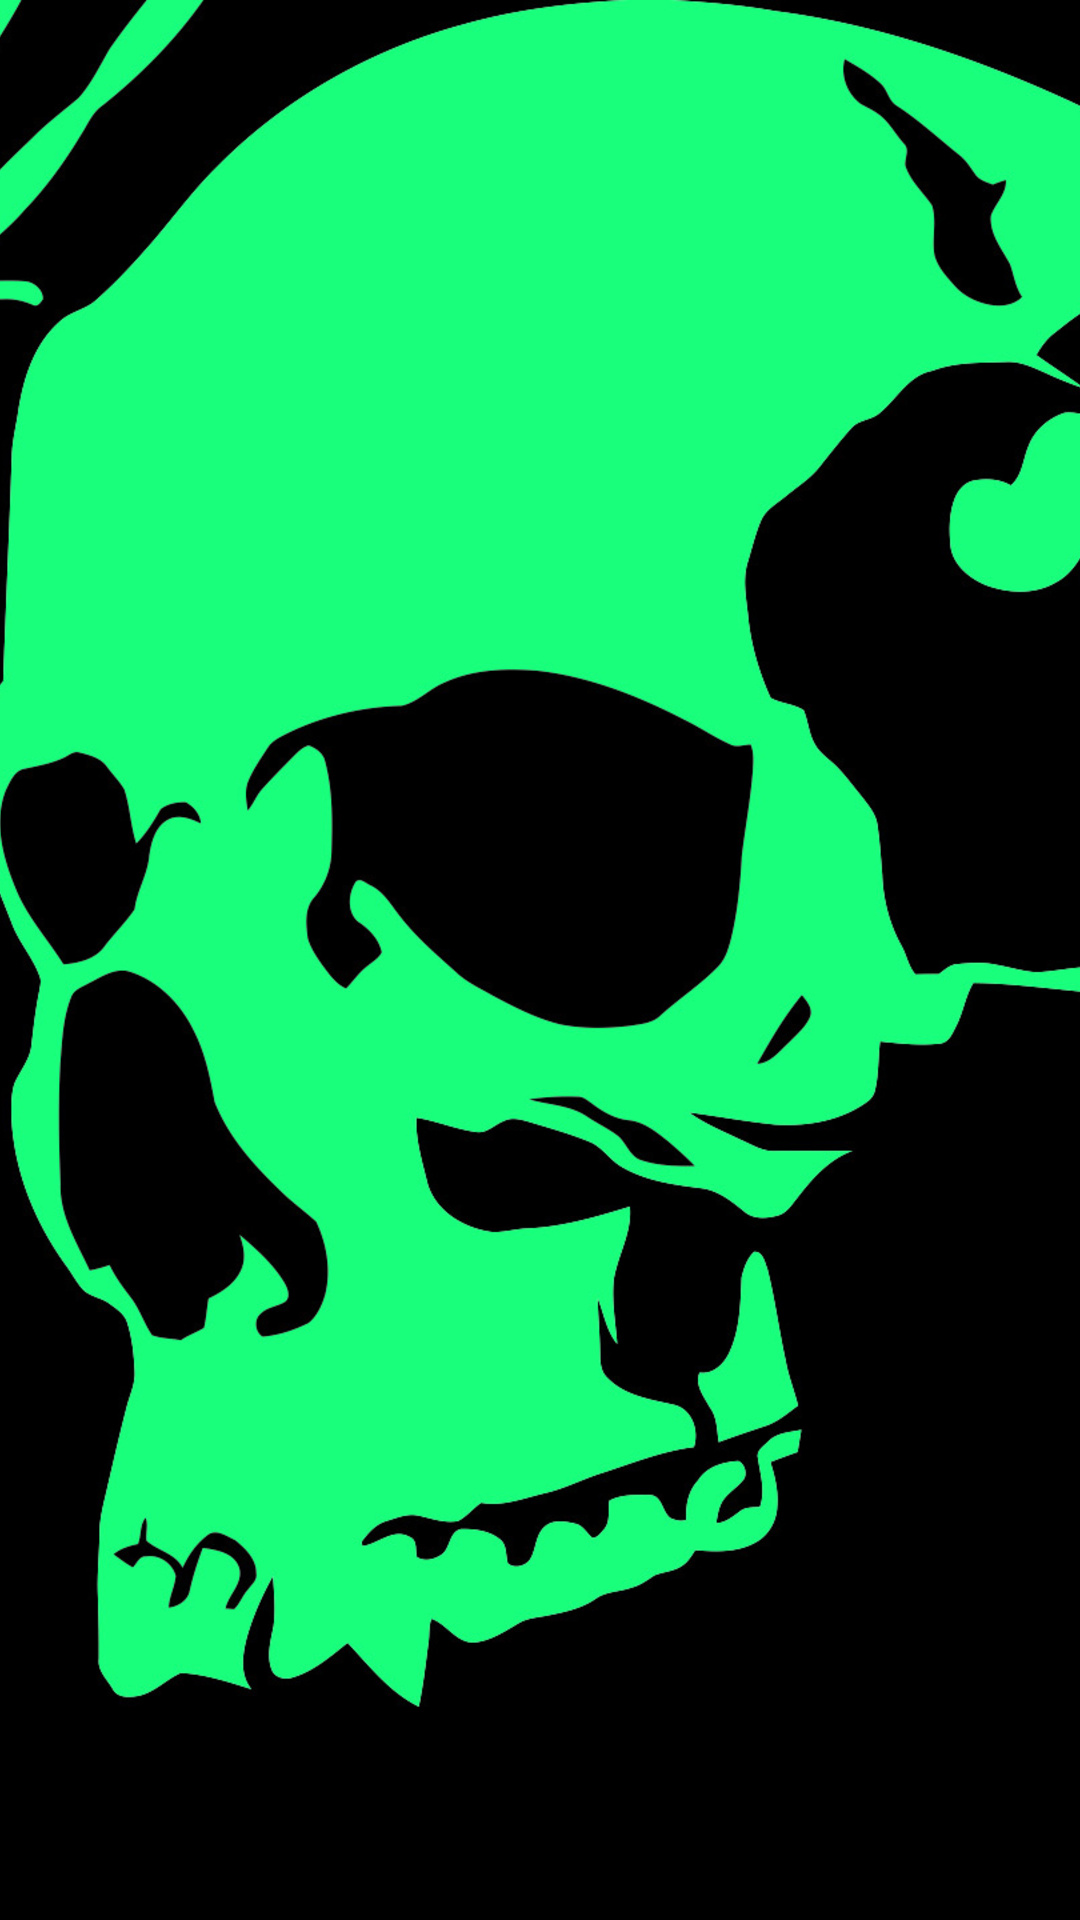 Download Green Skull wallpaper by NikkiFrohloff  06  Free on ZEDGE now  Browse millions of popular   Skull wallpaper Skull wallpaper iphone  Samurai wallpaper